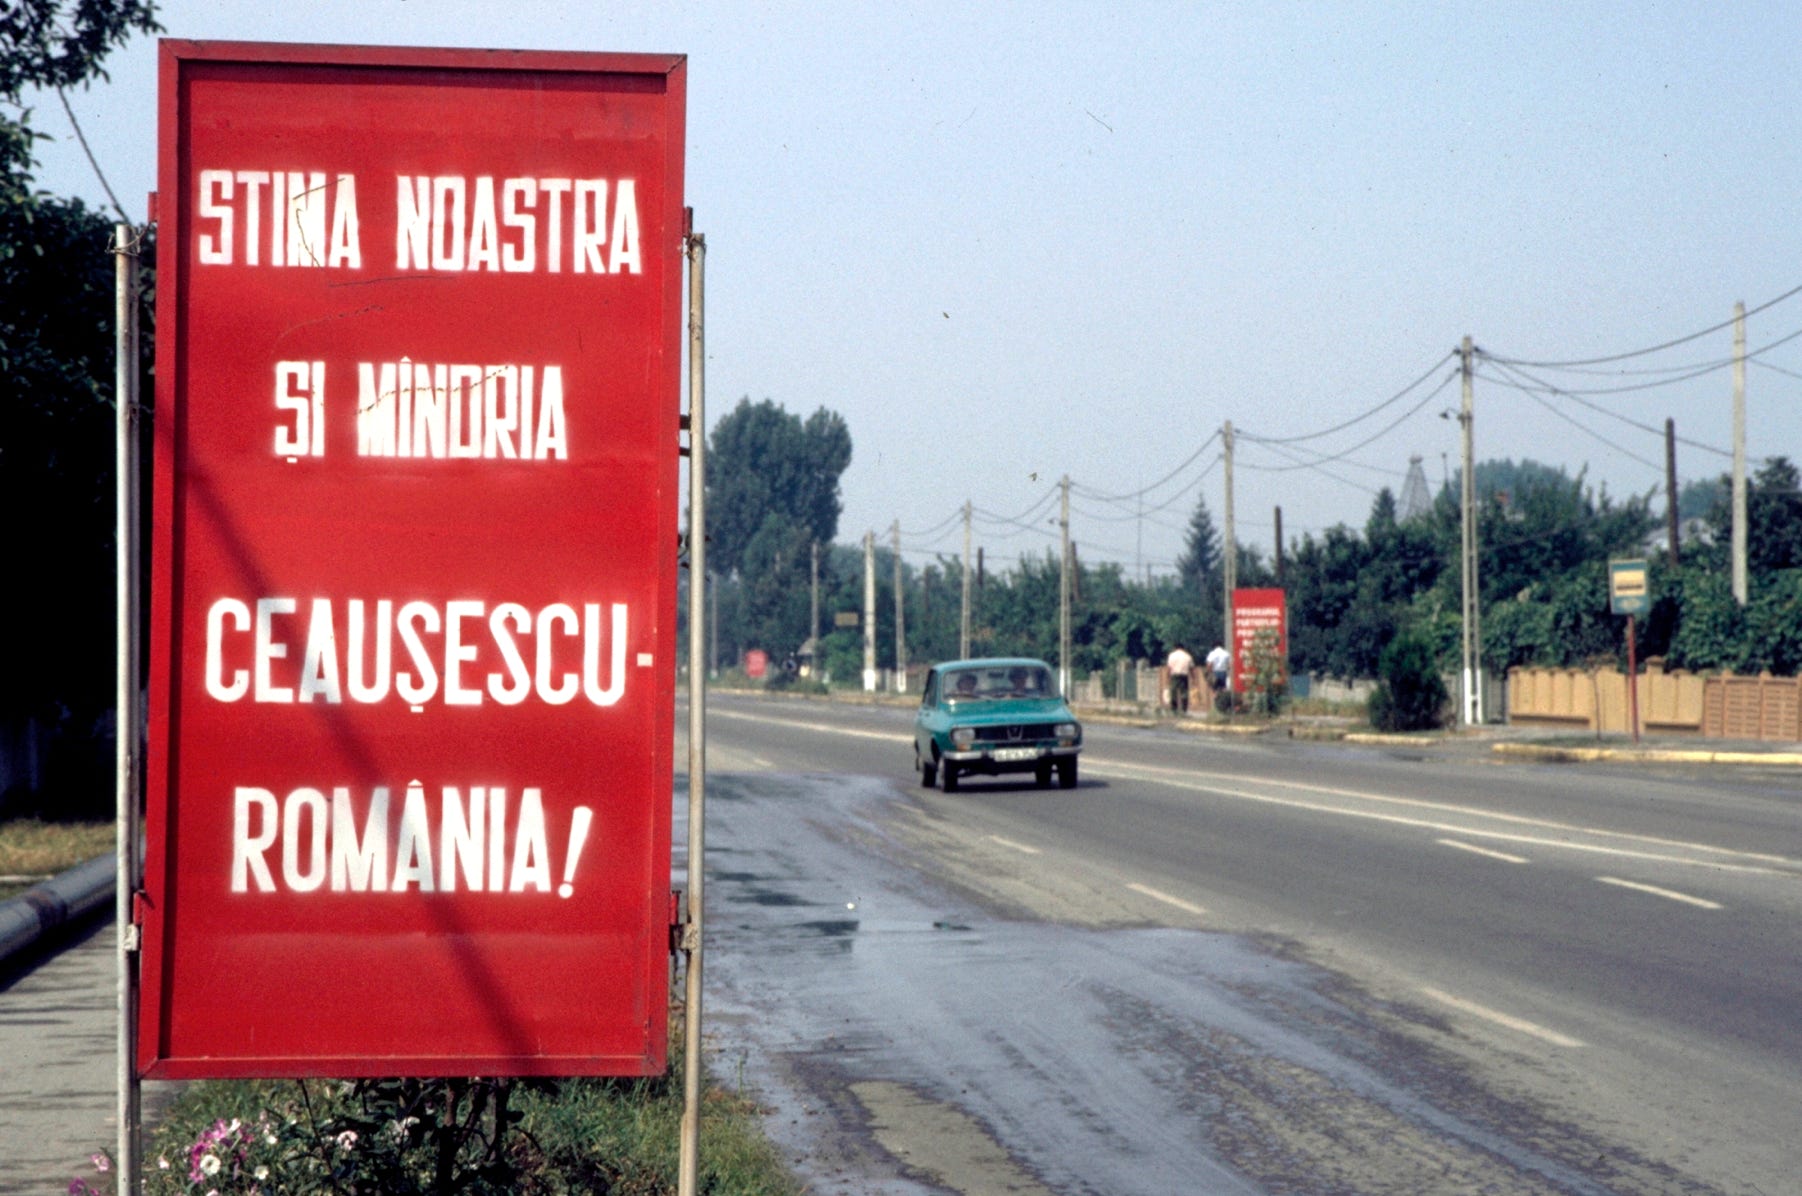 A road sign in the town of 30 Decembrie (30 December), south of Bucharest, when I visited in 1987.  The sign, typical of hundreds across Romania at the time, means “Our esteem and pride – Ceauşescu – Romania!”.  